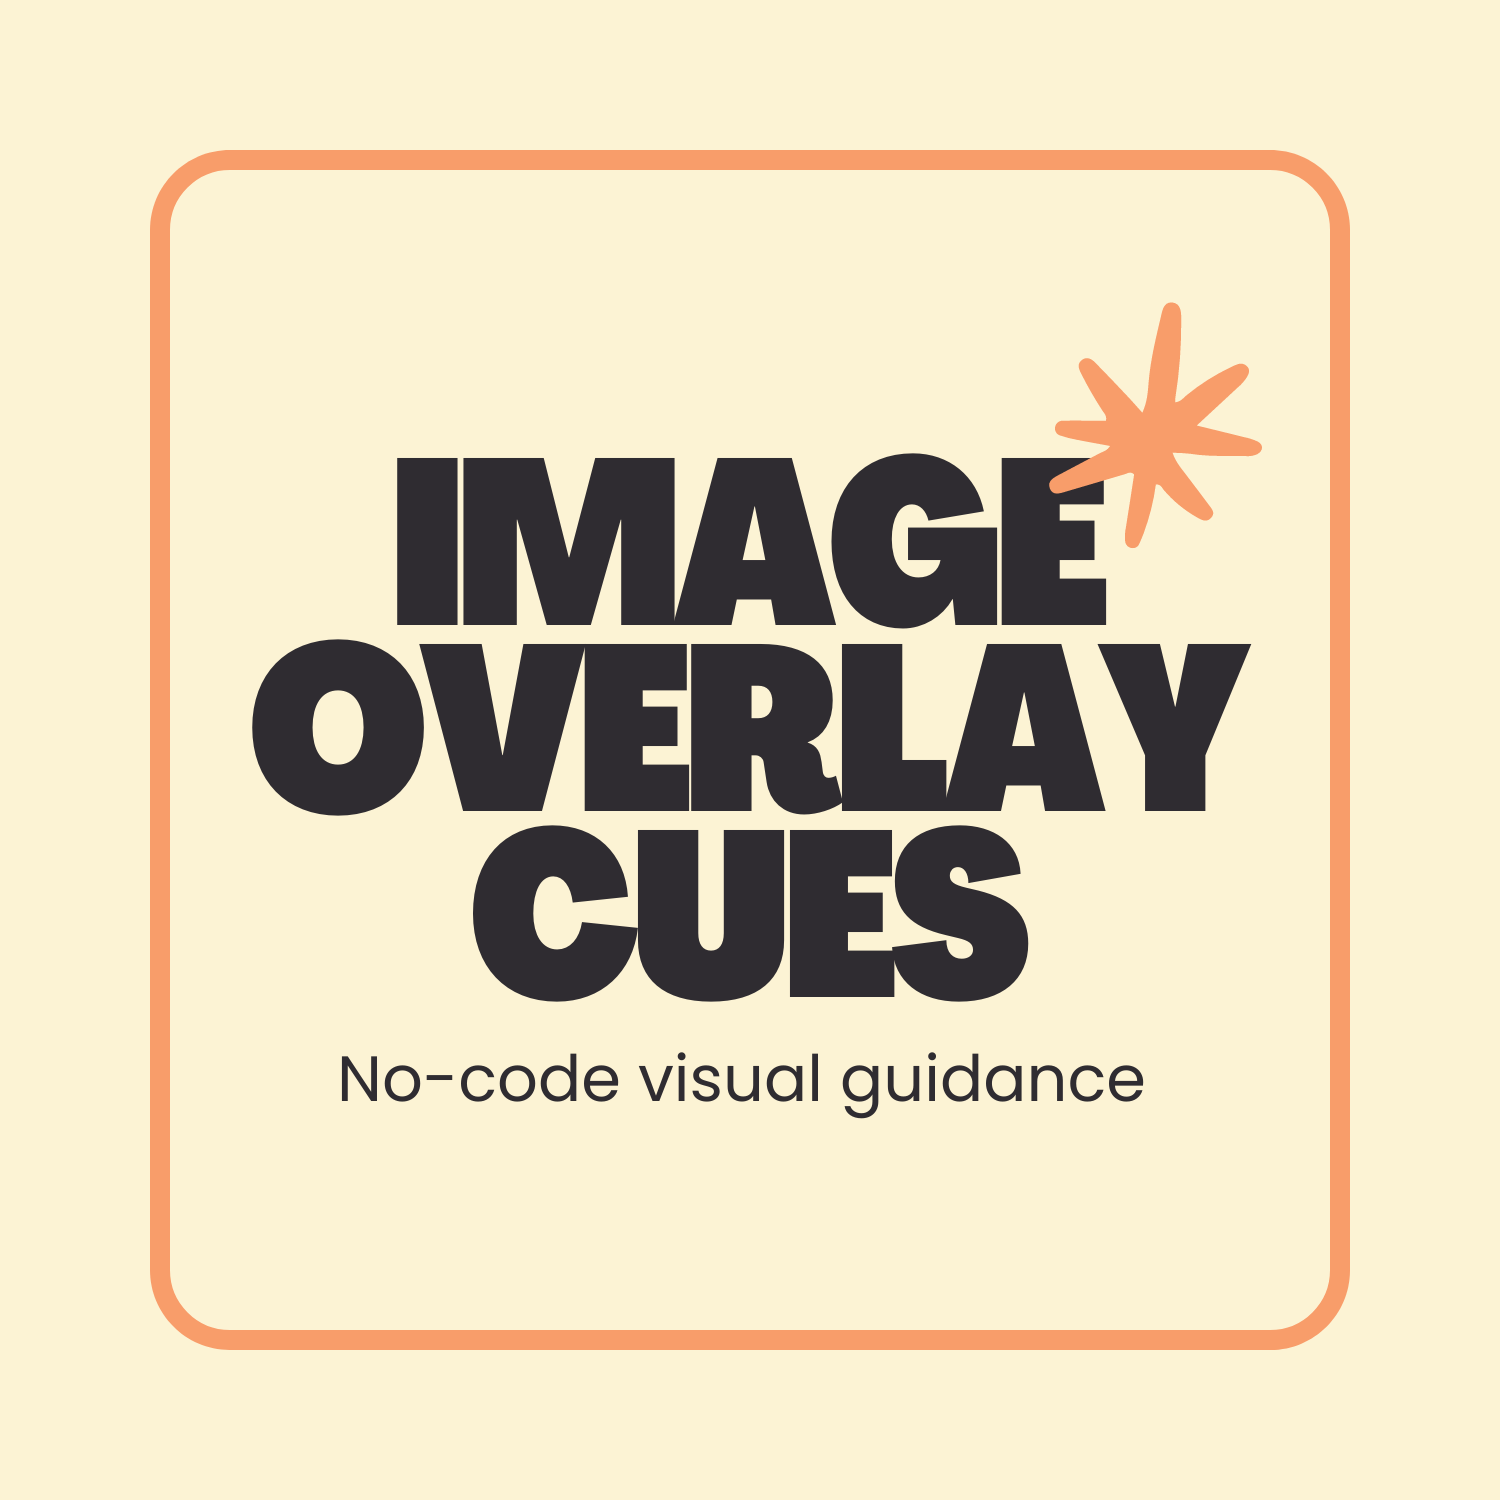 Image Overlay Cues